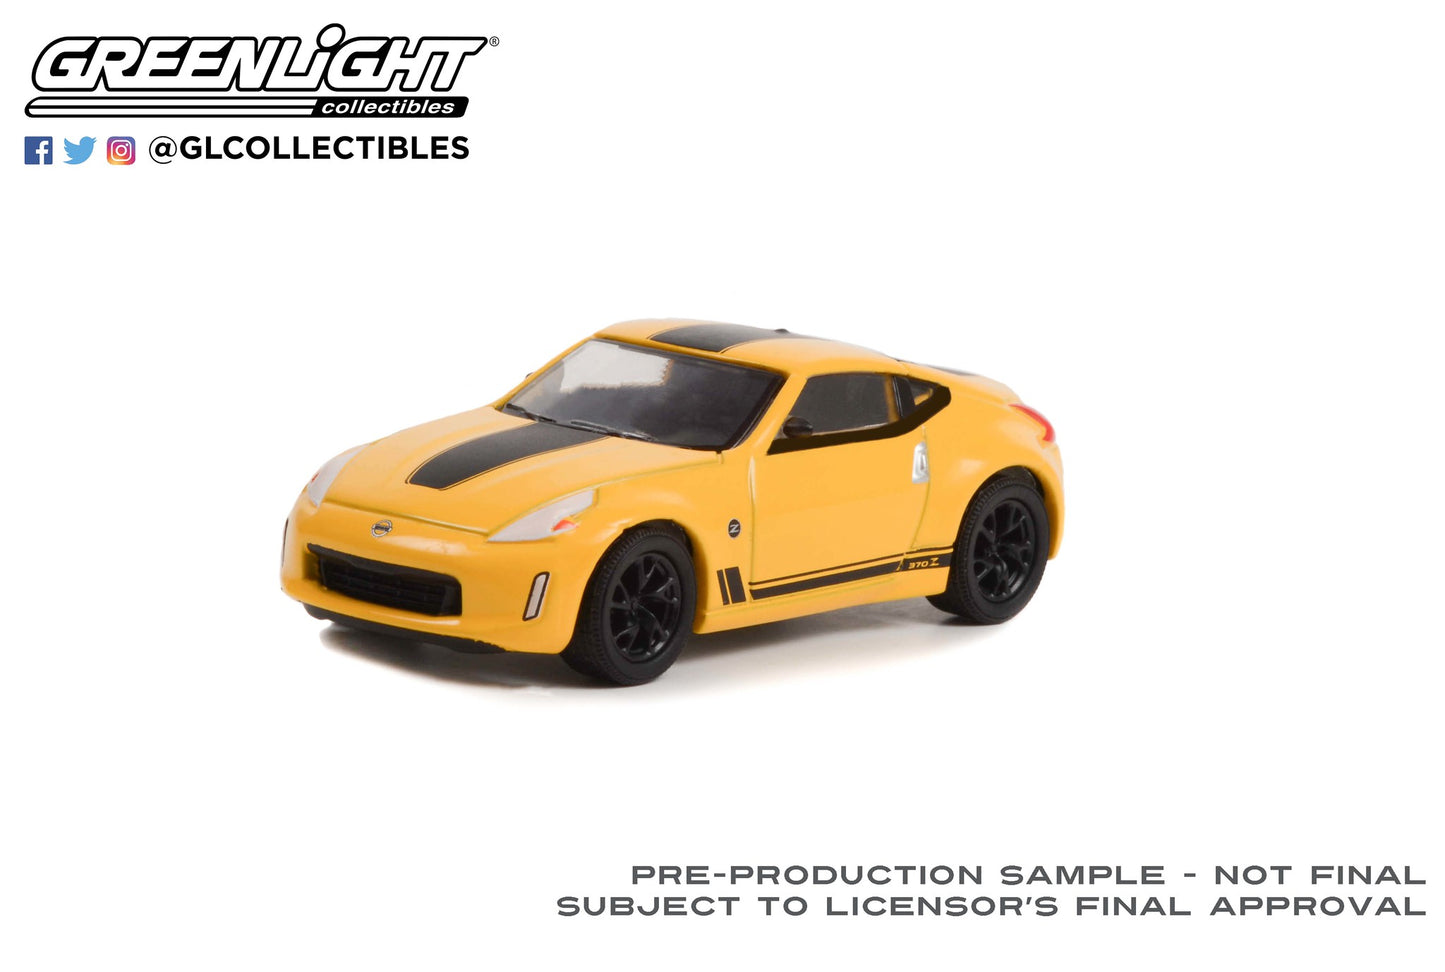 GreenLight 1:64 Hot Hatches Series 2 - 2019 Nissan 370Z - Heritage Edition - Chicane Yellow Solid Pack 63020-F